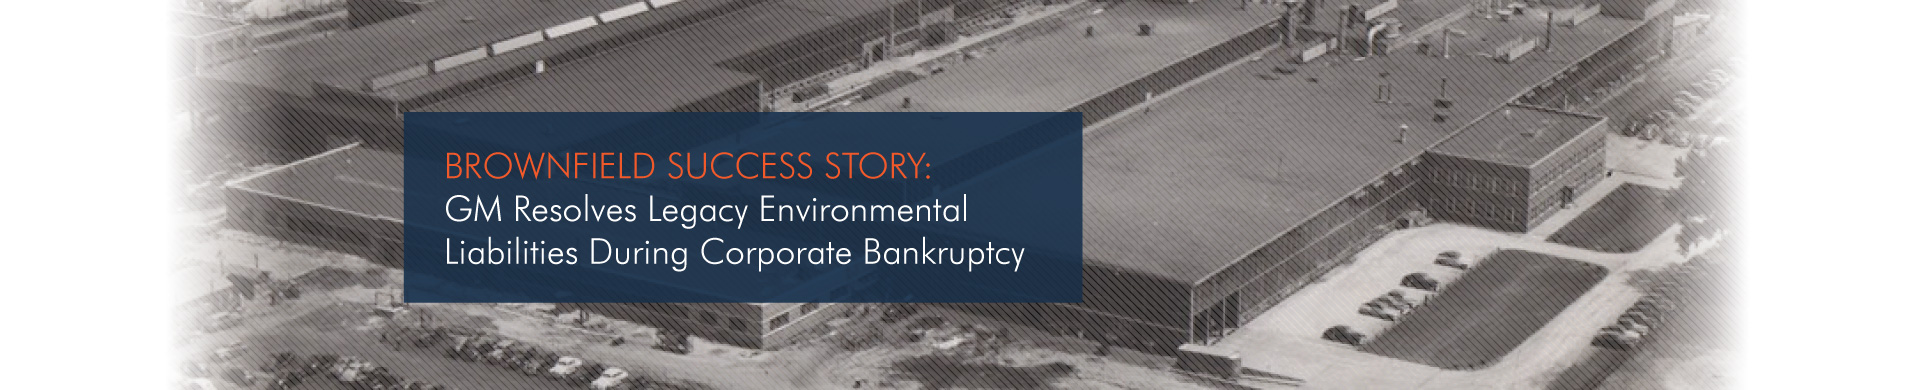 Brownfield Success Story